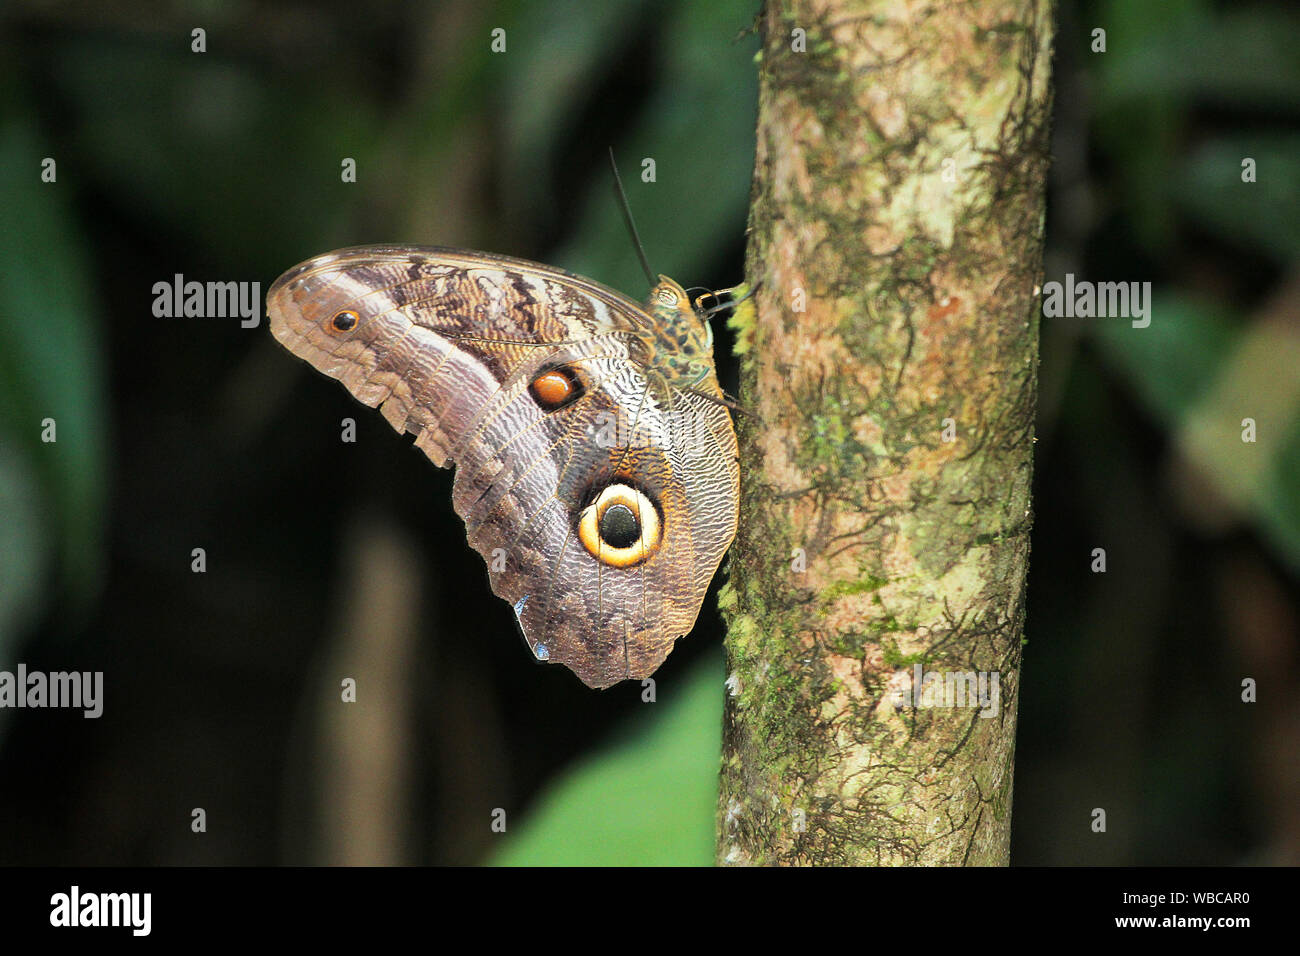 Morpho butterfly with closed wings in nature of French Guiana Stock Photo